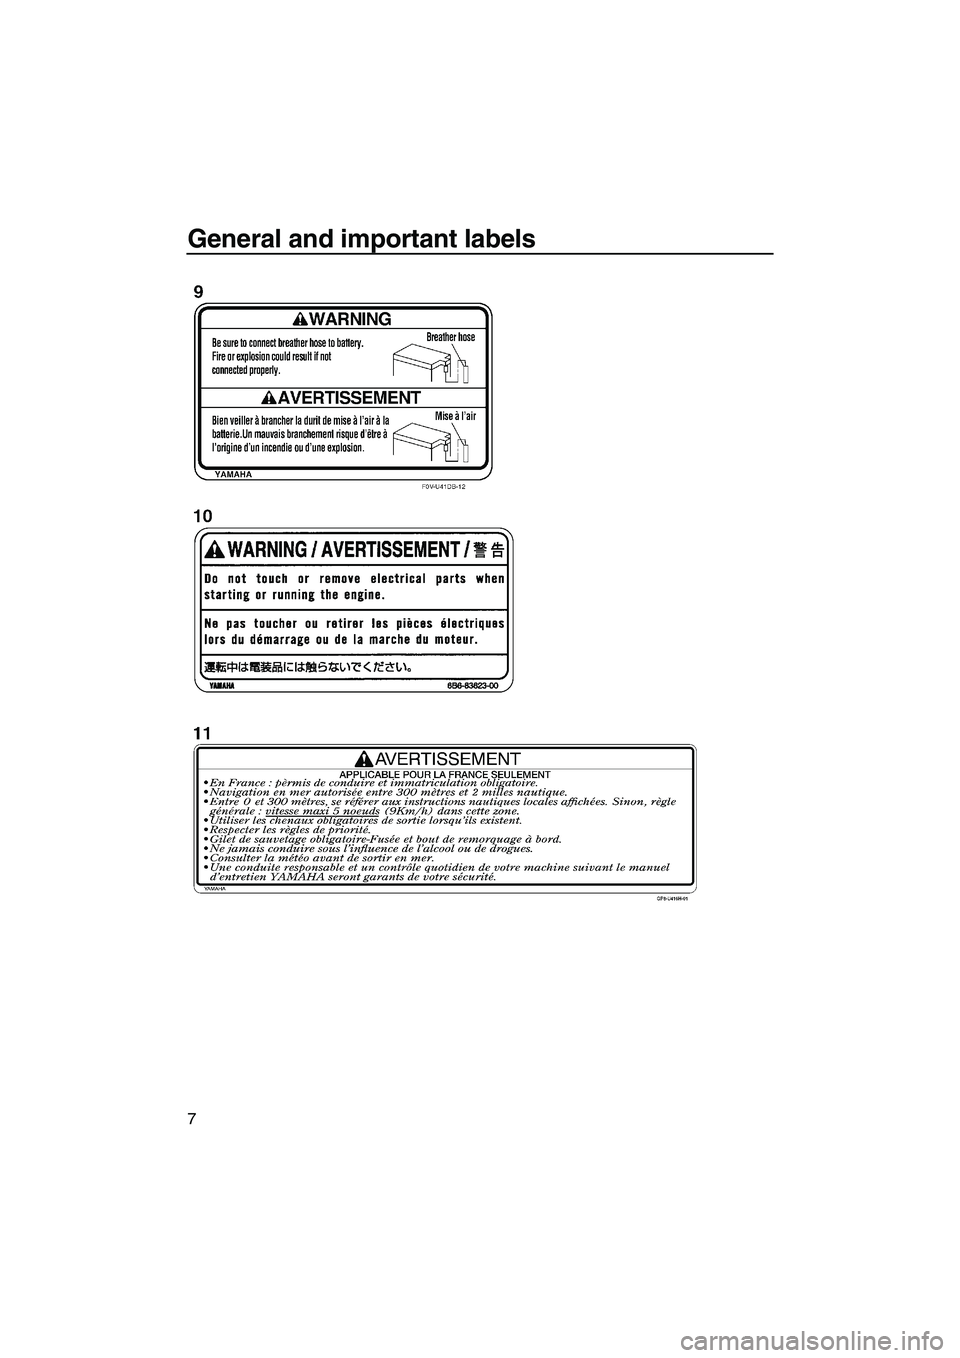 YAMAHA FZR SVHO 2009 User Guide General and important labels
7
UF2R70E0.book  Page 7  Thursday, November 6, 2008  10:05 AM 